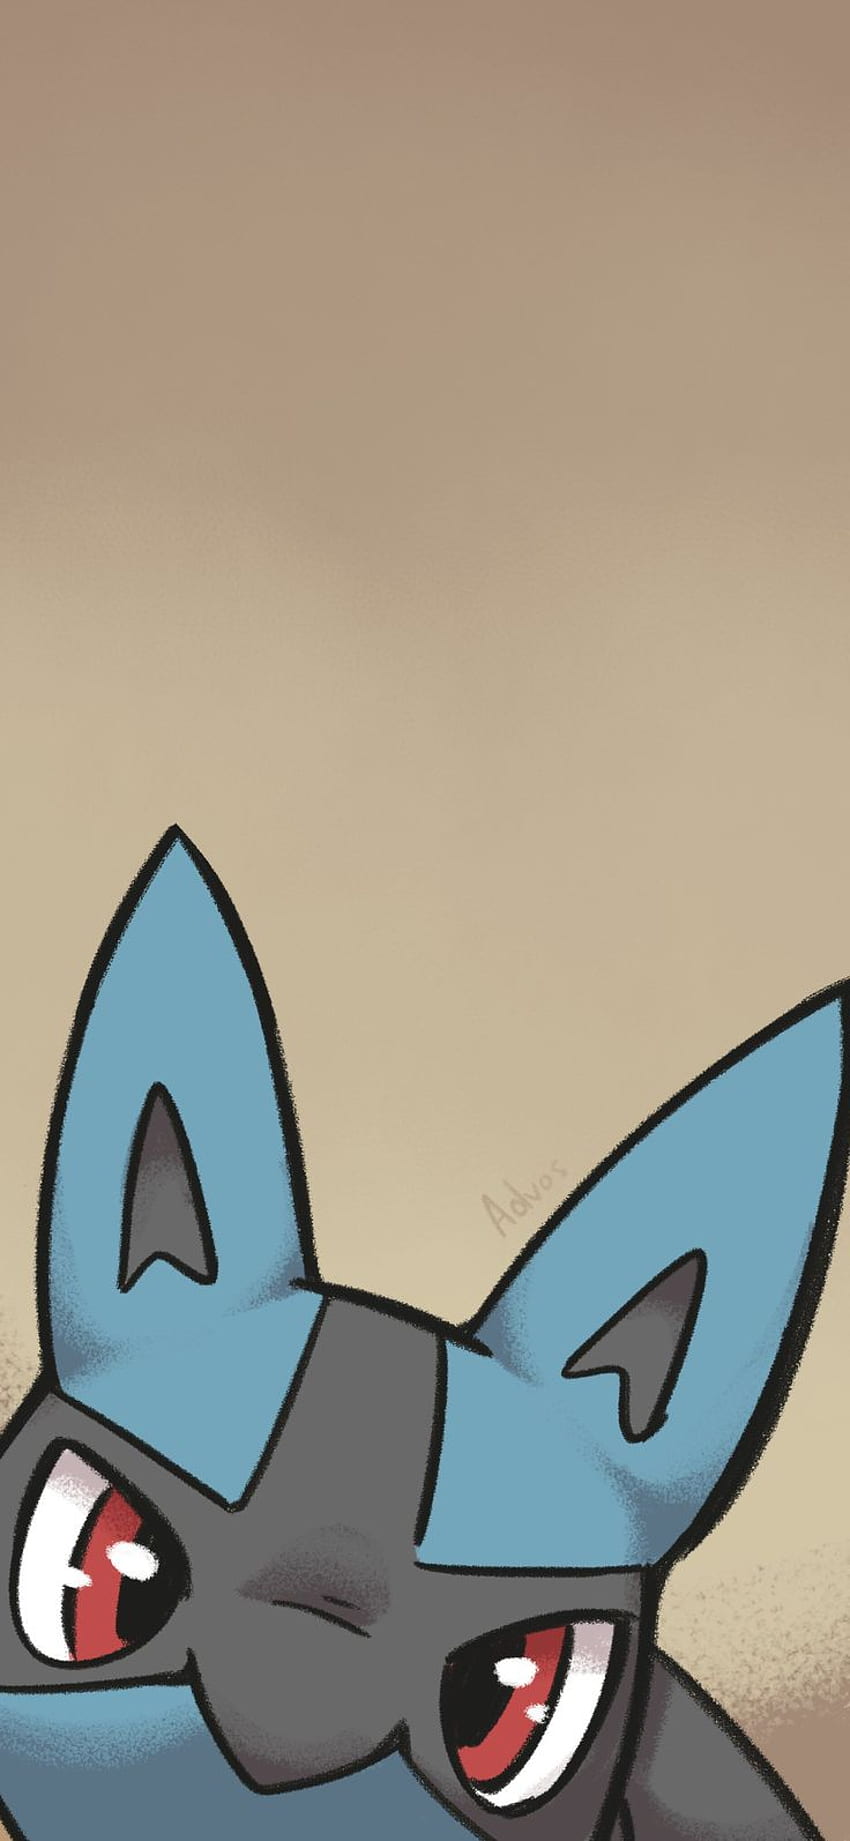 lukey lucario on Quick Saves in 2021. Cute pokemon , Pokemon zoroark, Cool pokemon , Lucario and Zoroark HD phone wallpaper